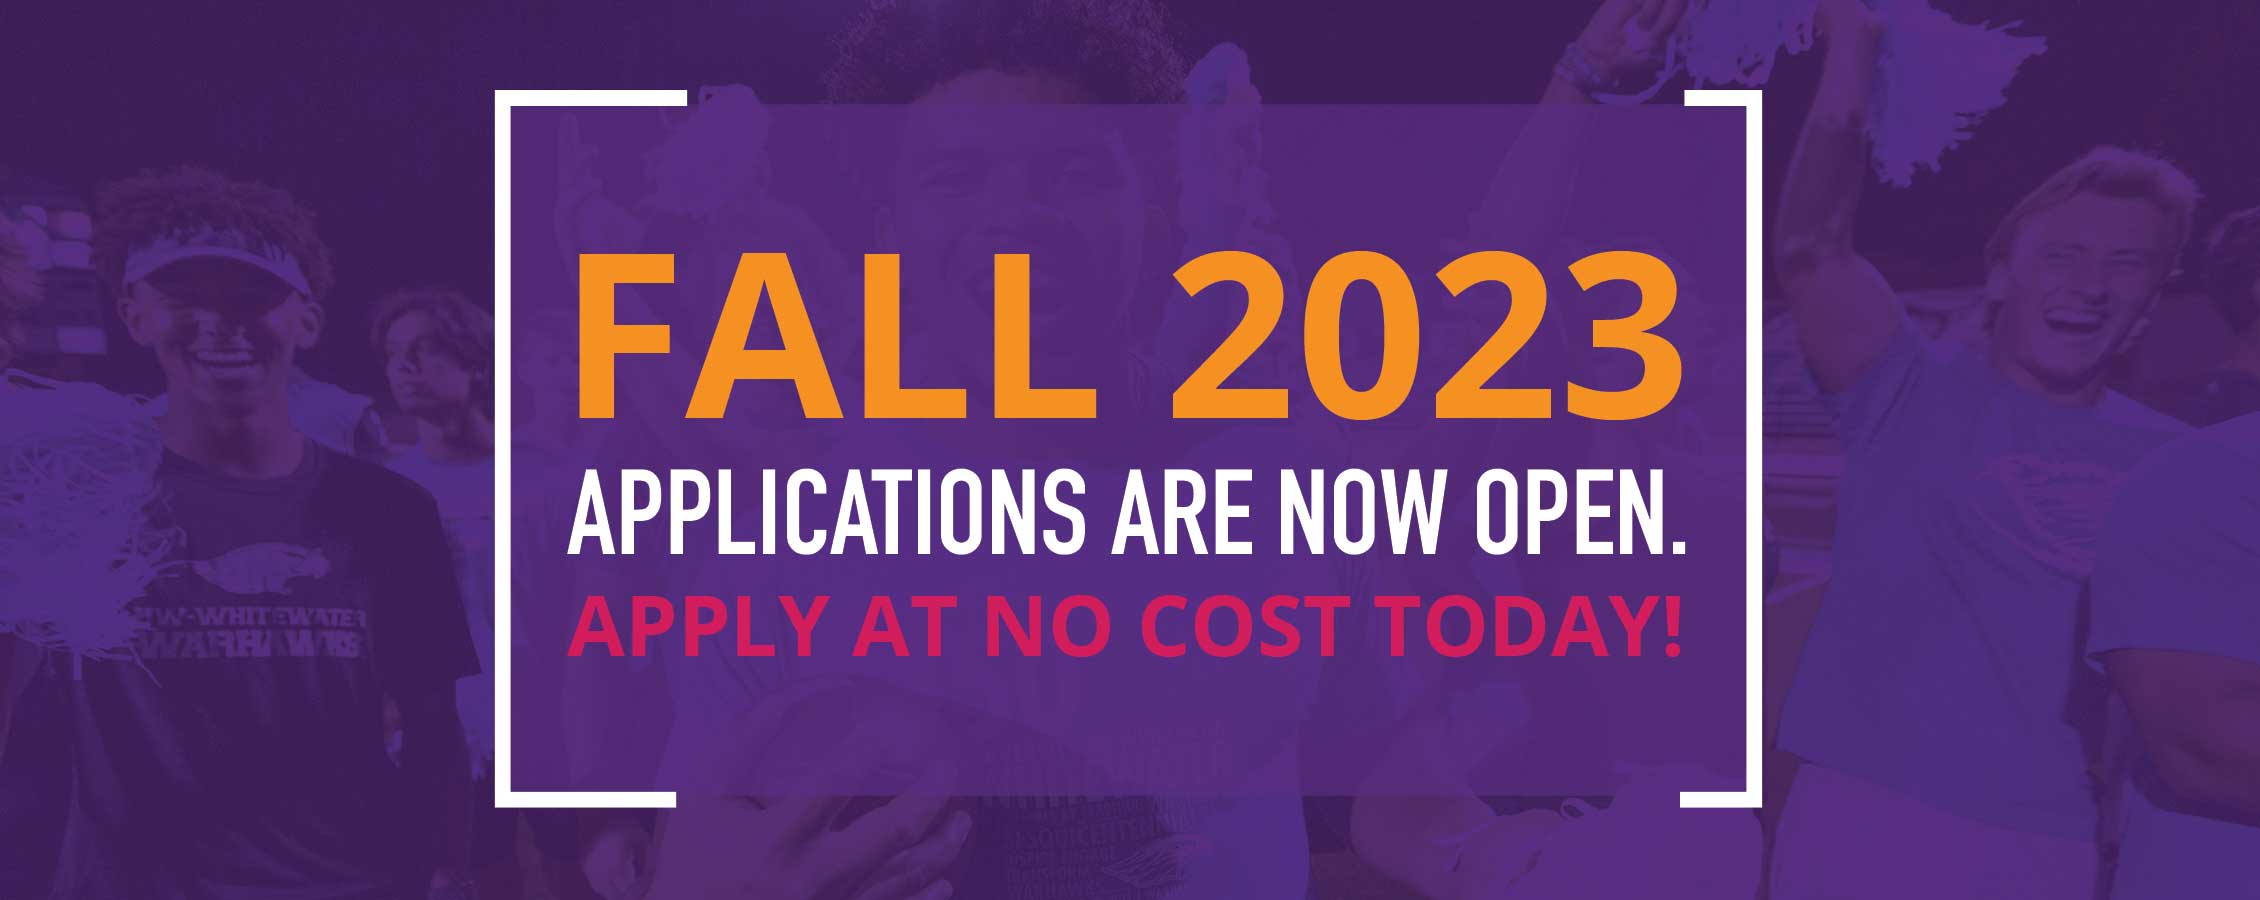 Fall 2023 apply now!